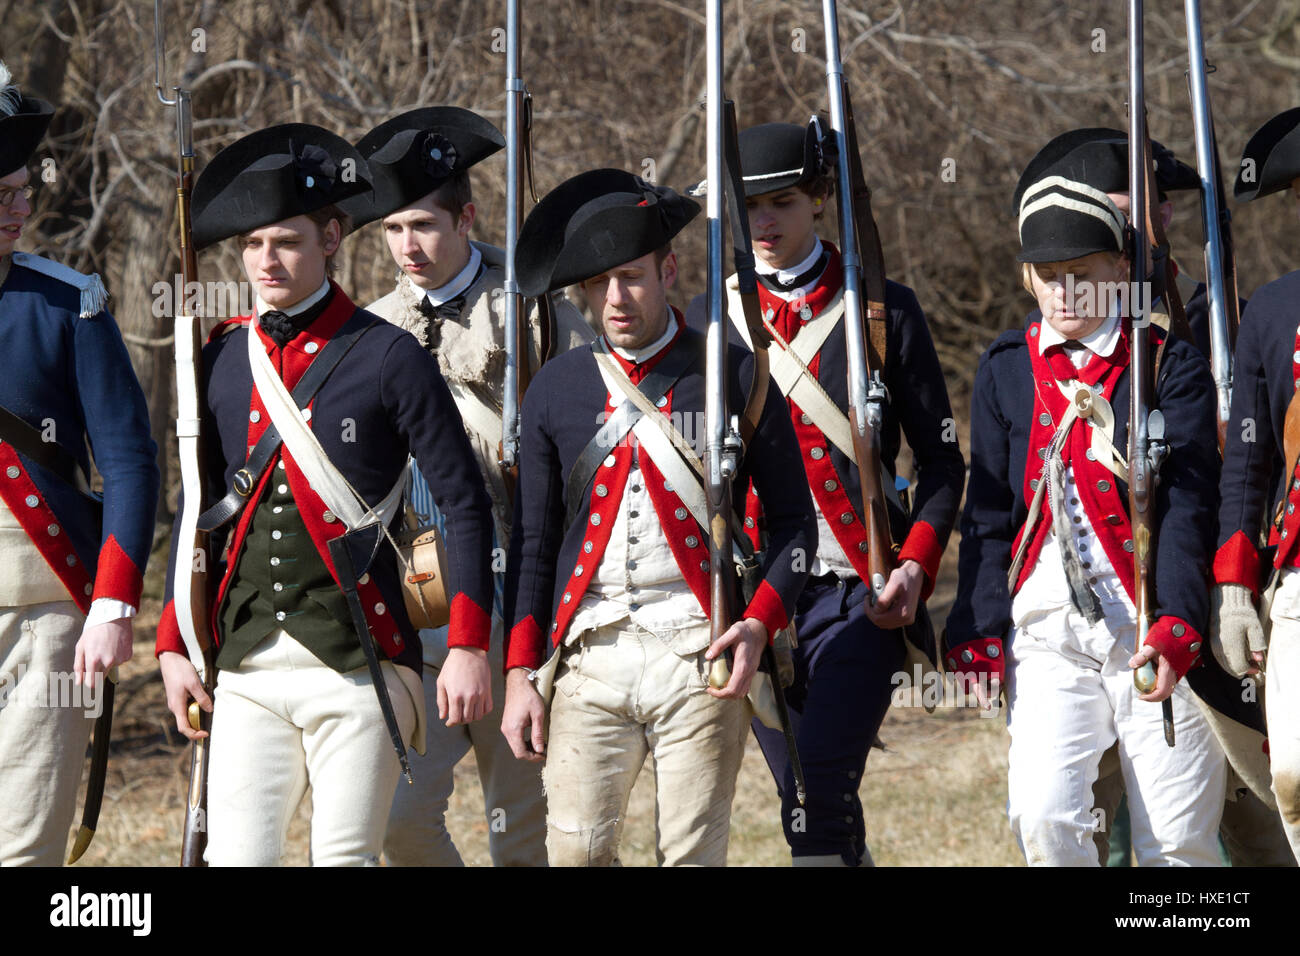 VALLEY FORGE, PA - FEBRUARY 2012: Revolutionary War soldiers during a reenactment in Valley Forge National Historic Park Stock Photo